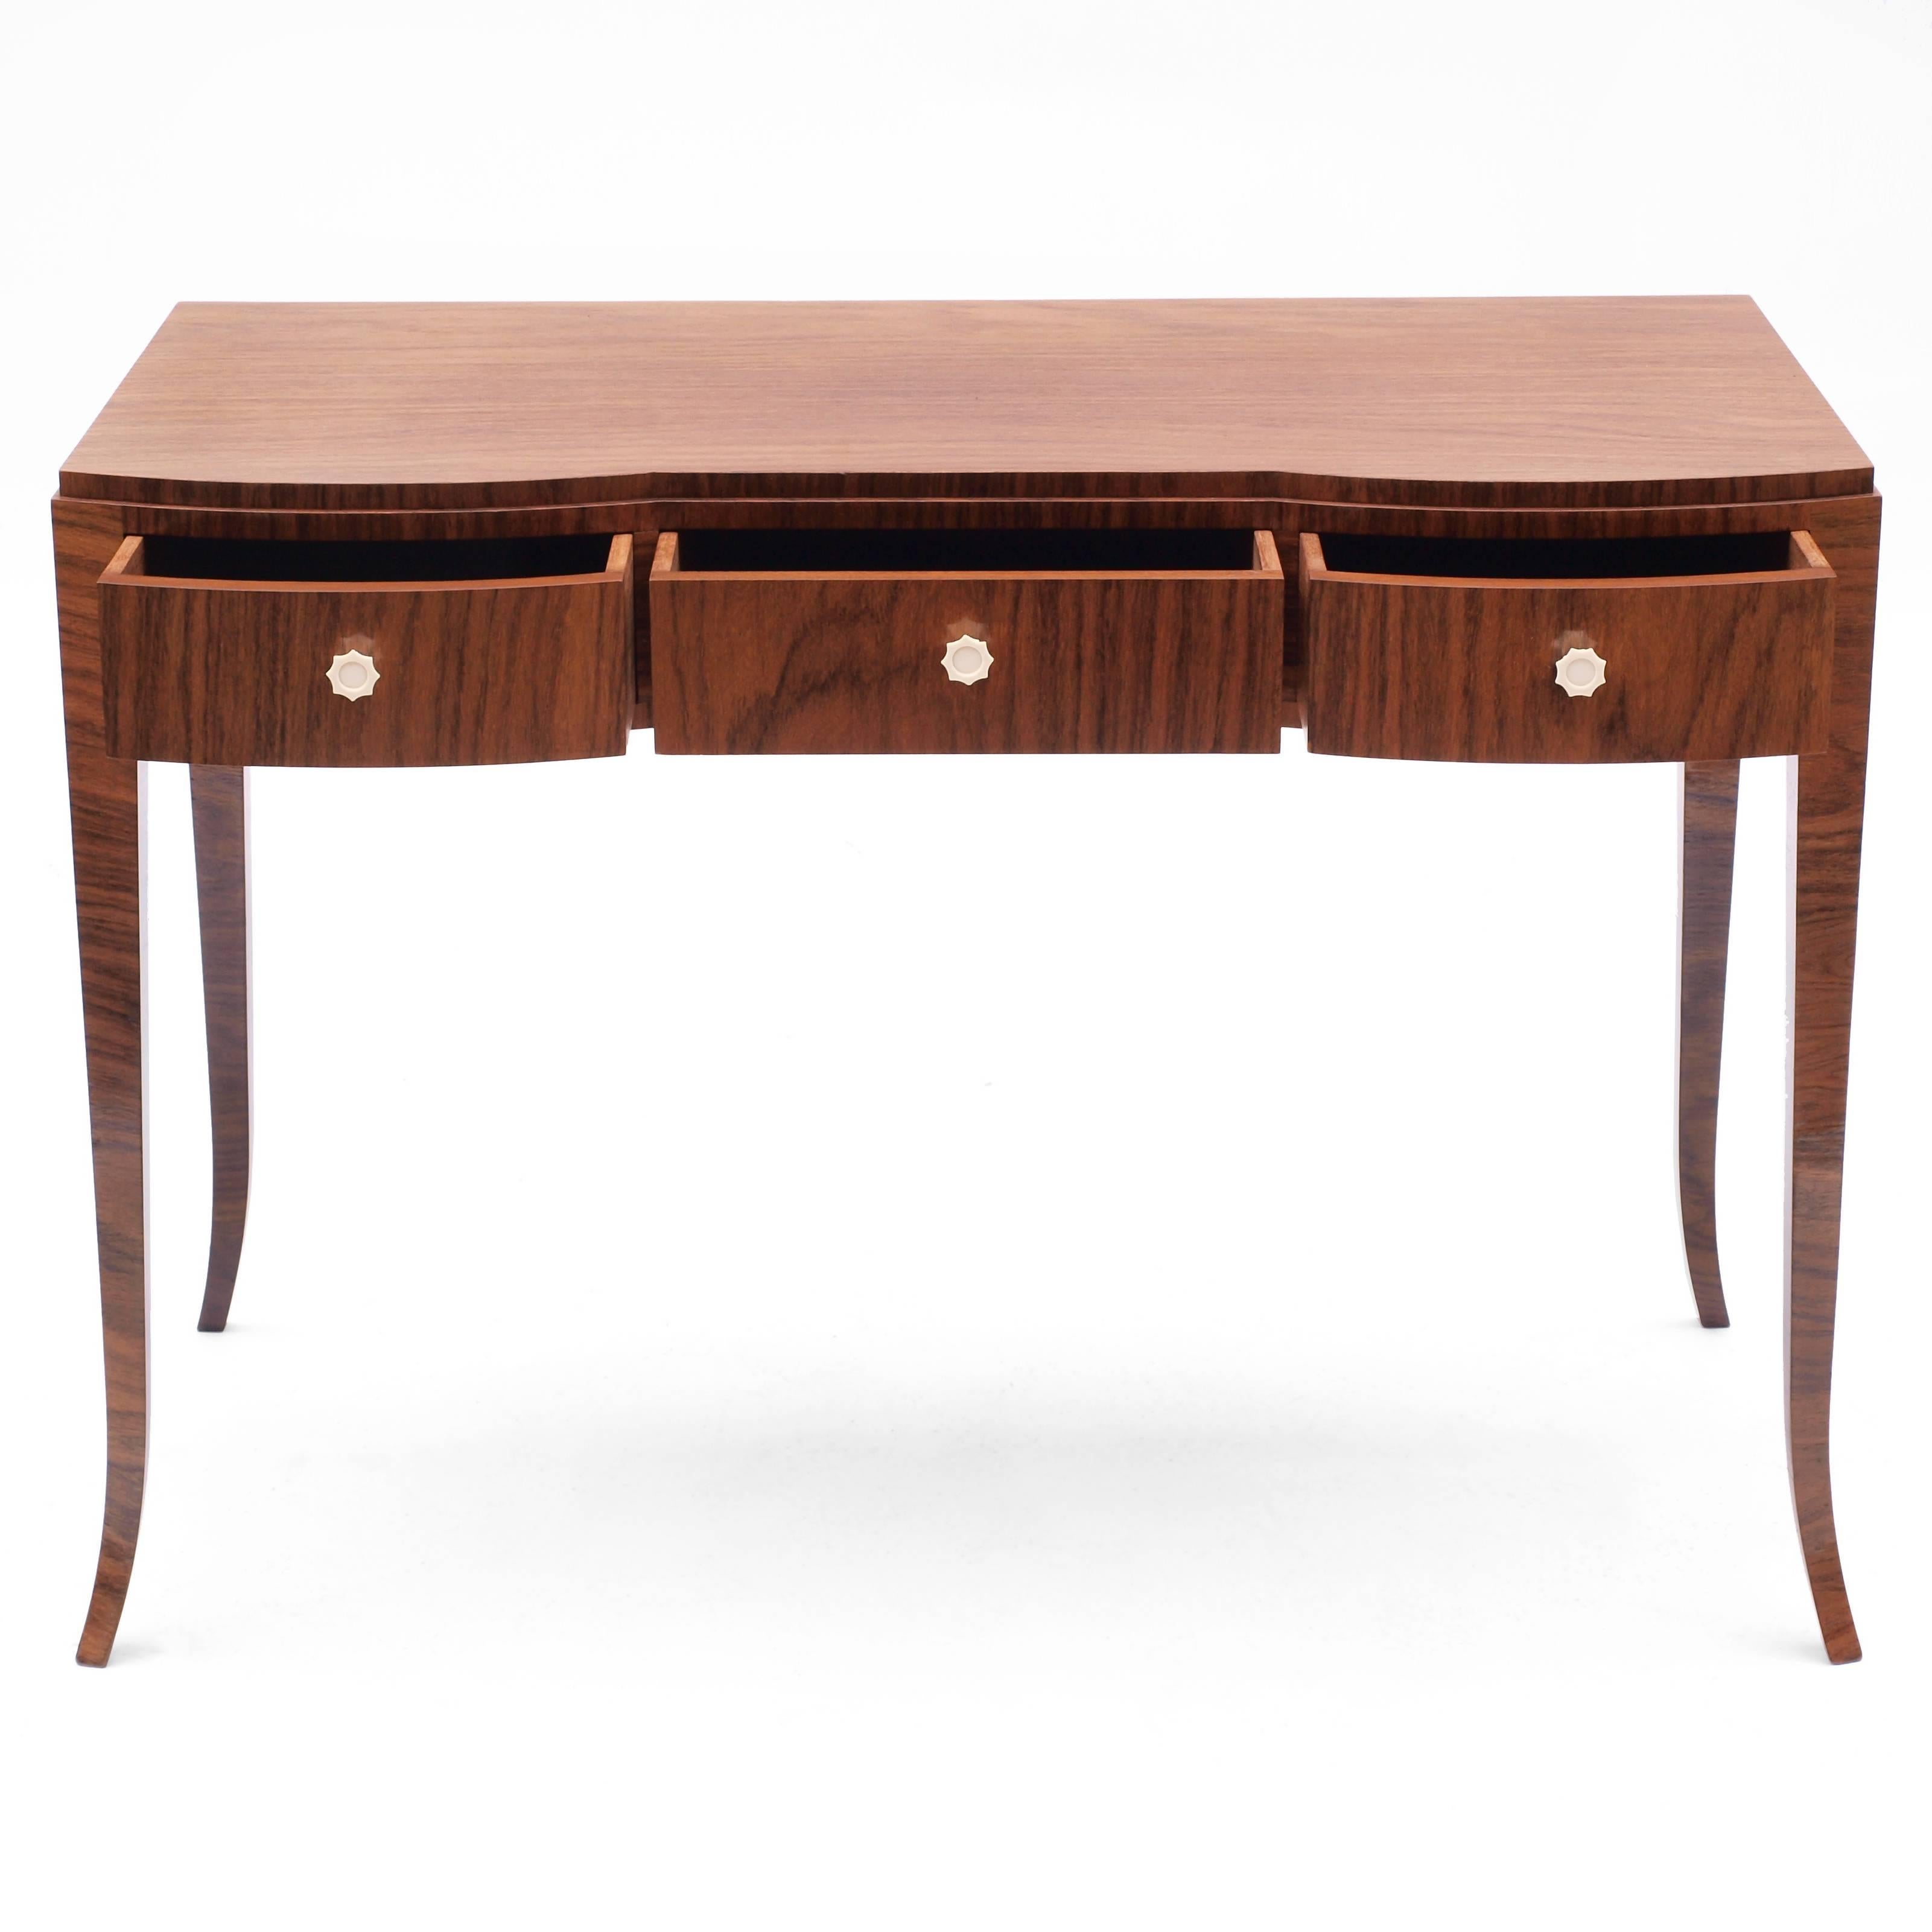 French Writing Desk by Andre Domin & Marcel Genevriere for Maison Dominique, circa 1920